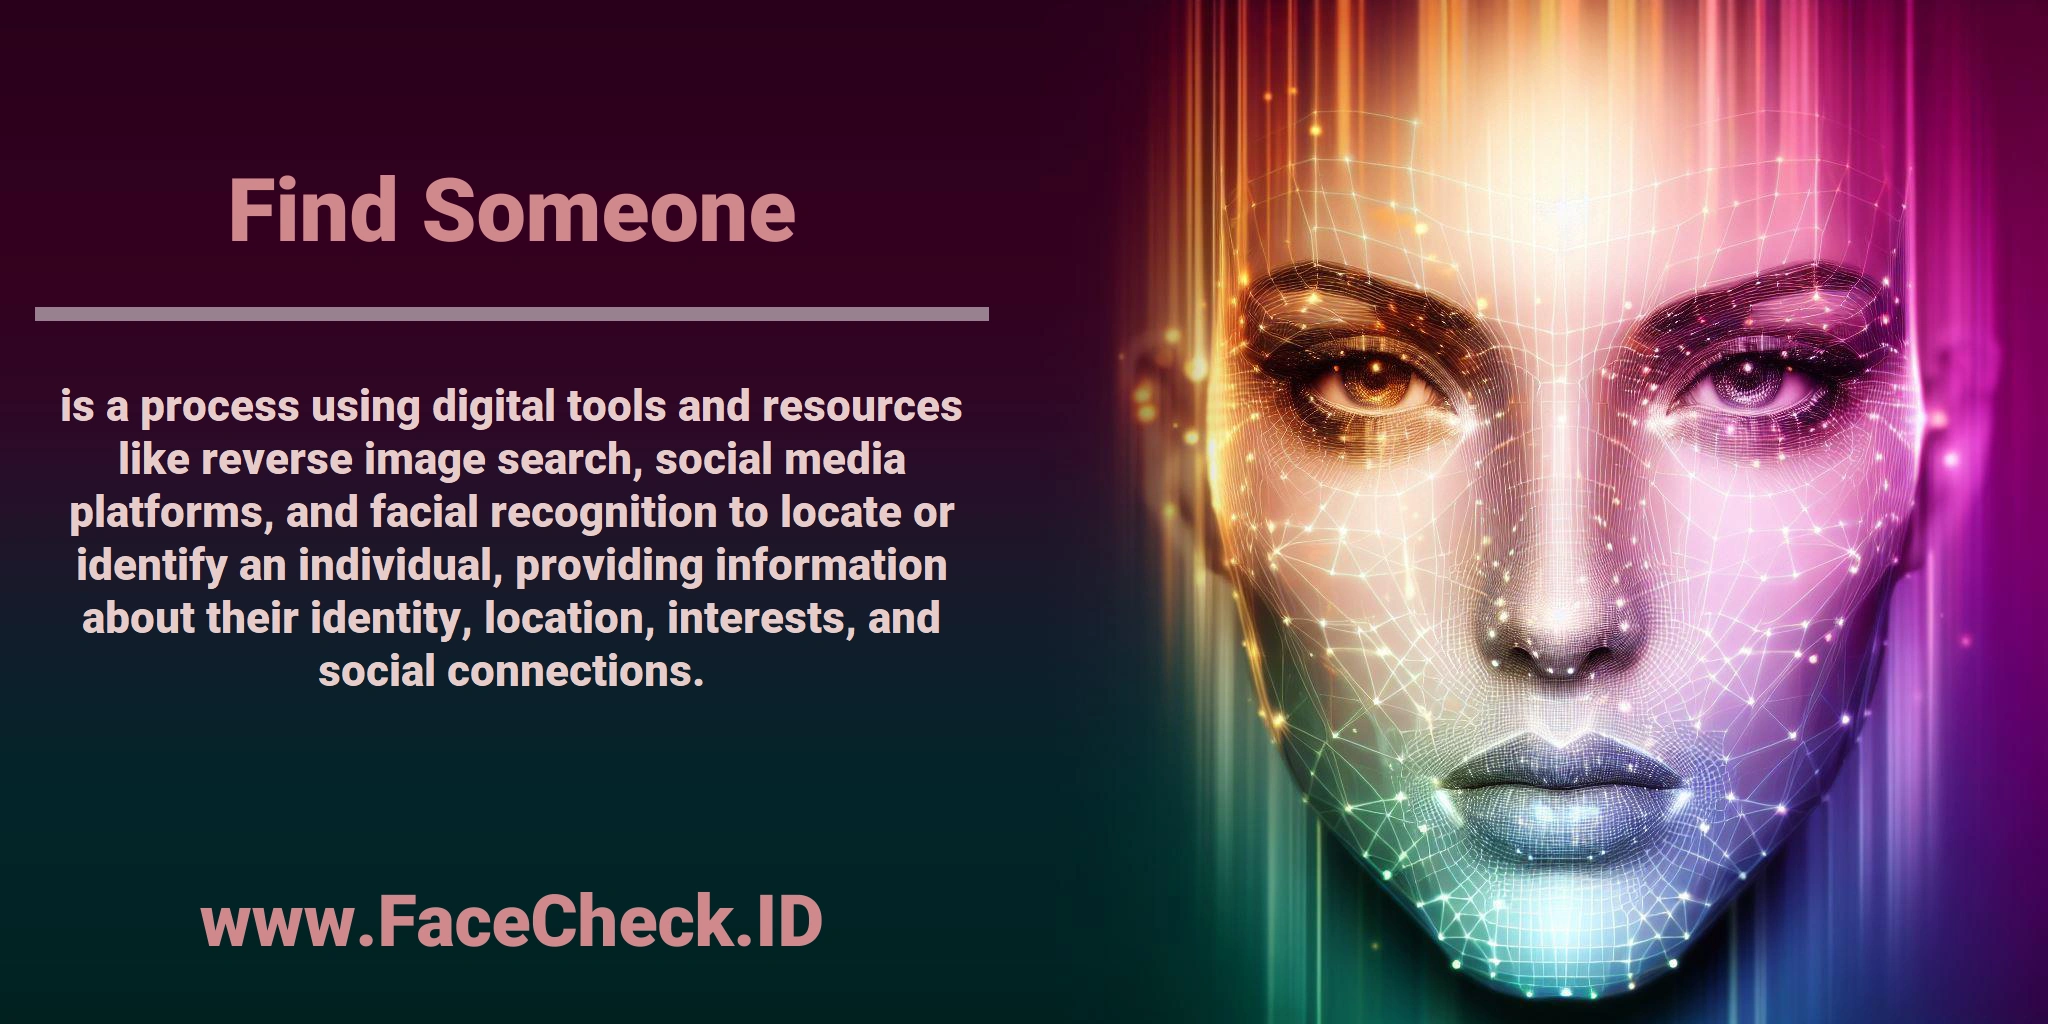 <b>Find Someone</b> is a process using digital tools and resources like reverse image search, social media platforms, and facial recognition to locate or identify an individual, providing information about their identity, location, interests, and social connections.